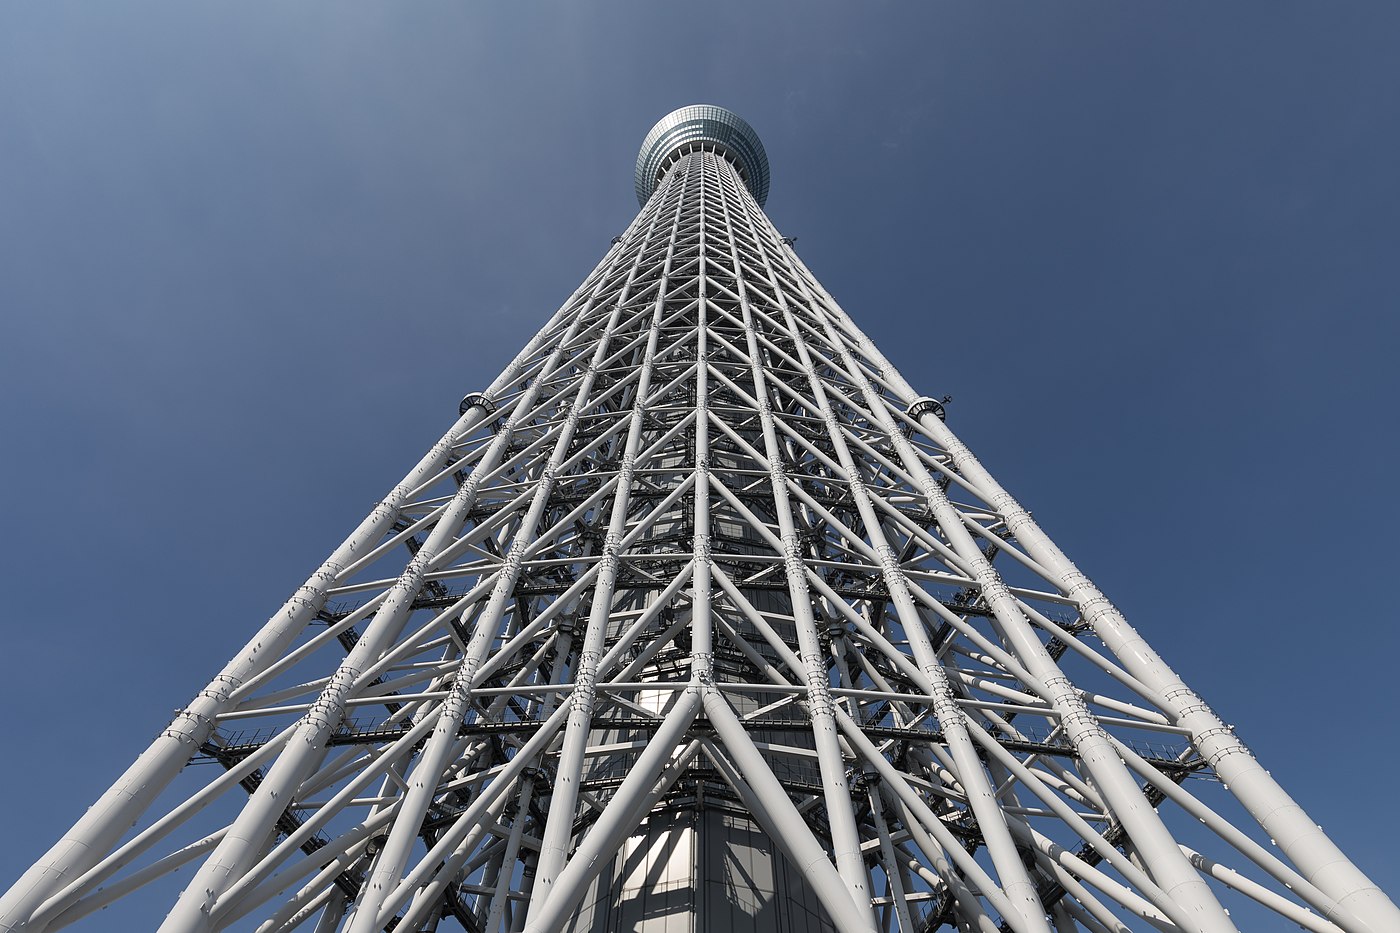 Worm's-eye view of Tokyo Skytree